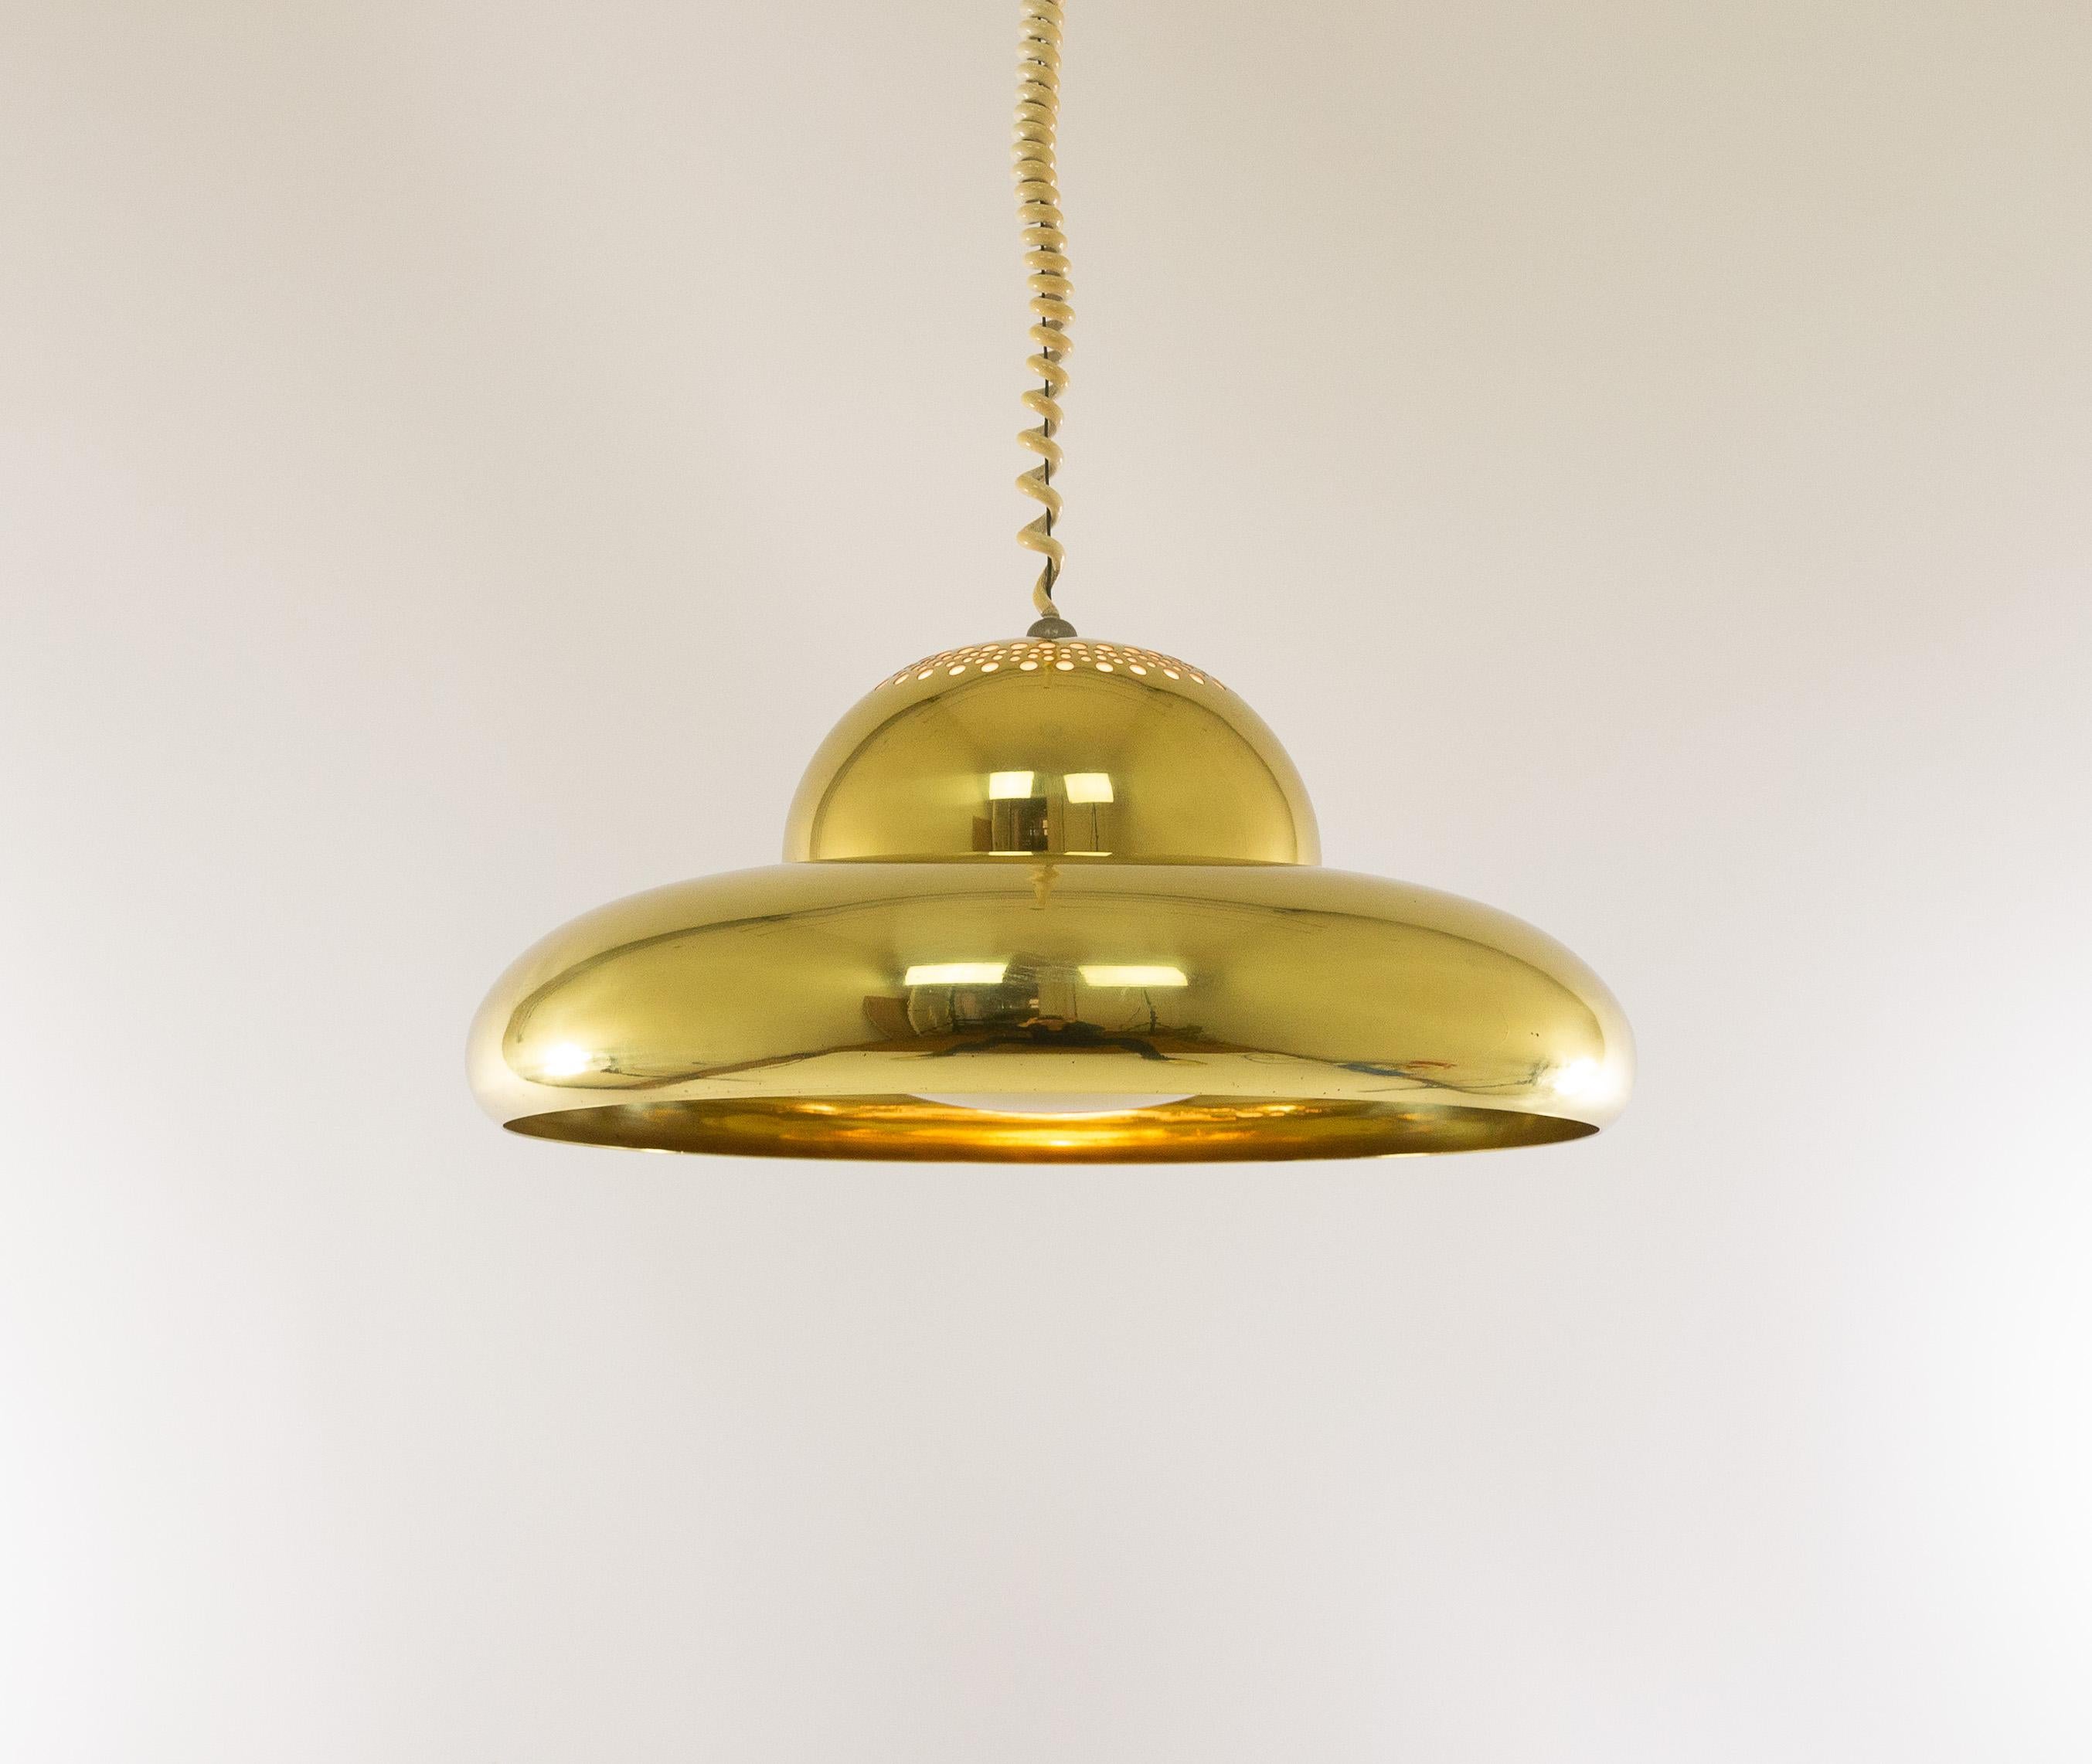 Italian Brass Pendant Fior Di Loto by Afra and Tobia Scarpa for Flos, 1960s